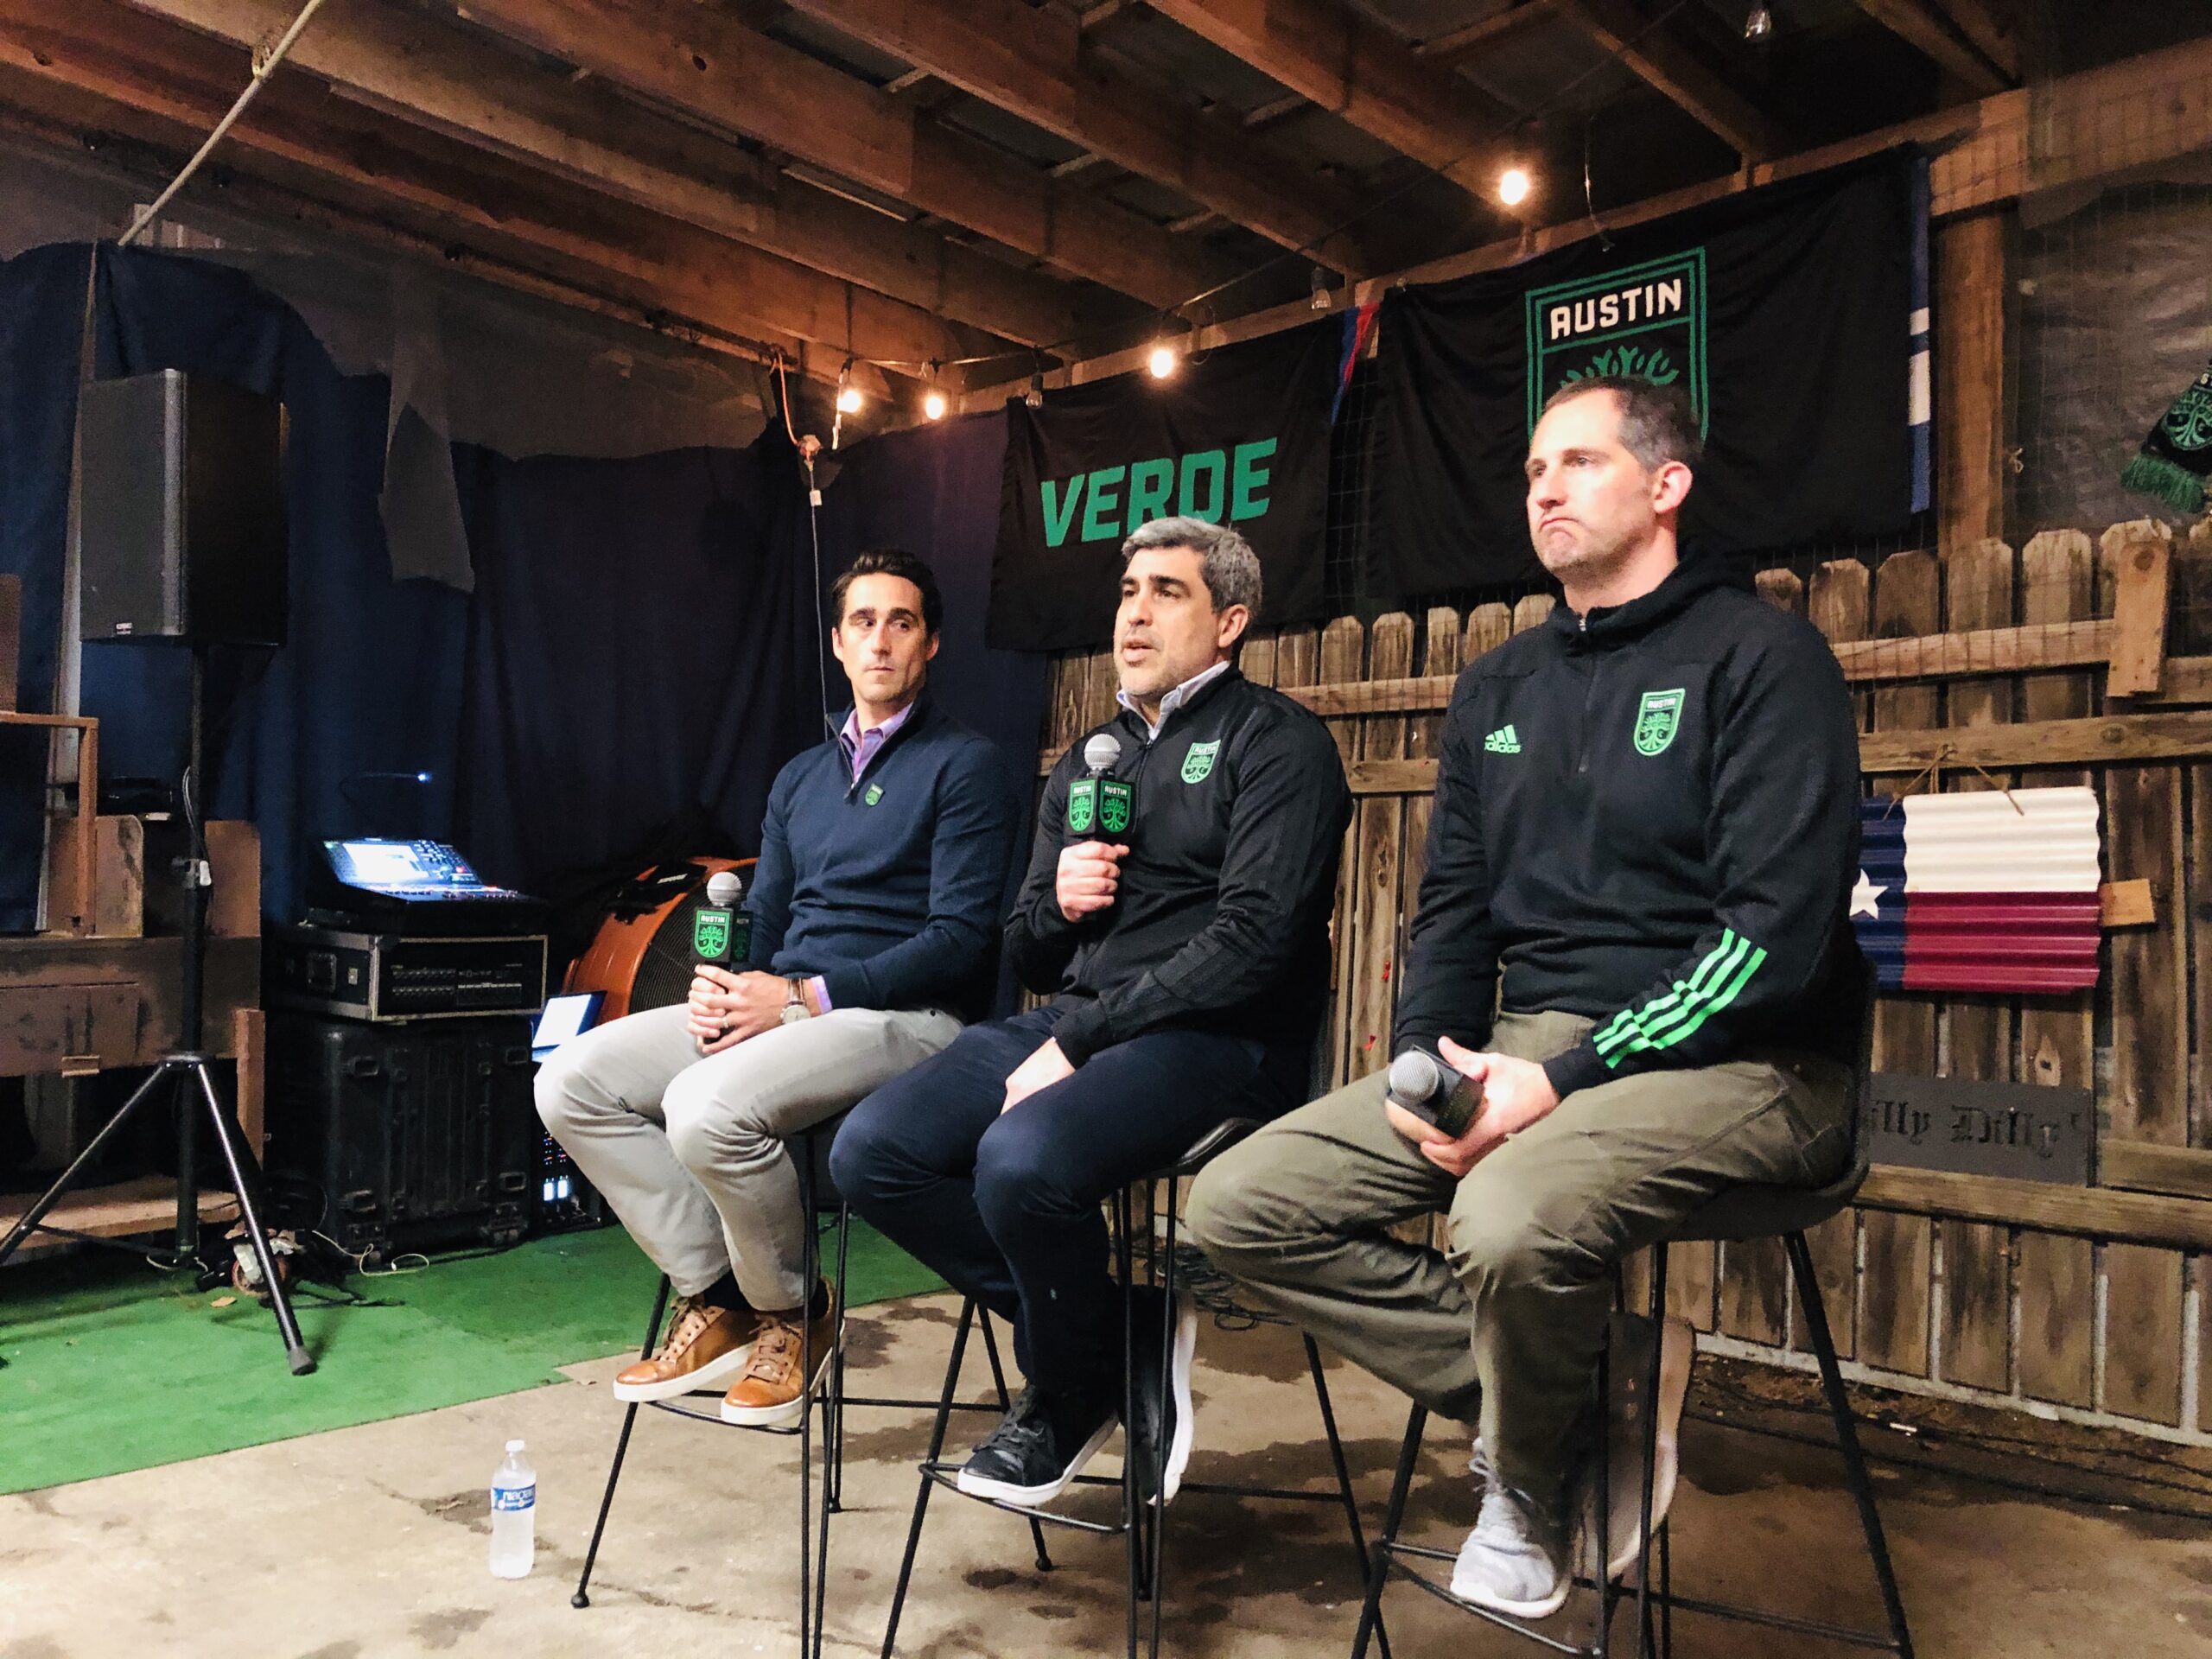 The Last Austin FC Meet and Greet before the world shut down